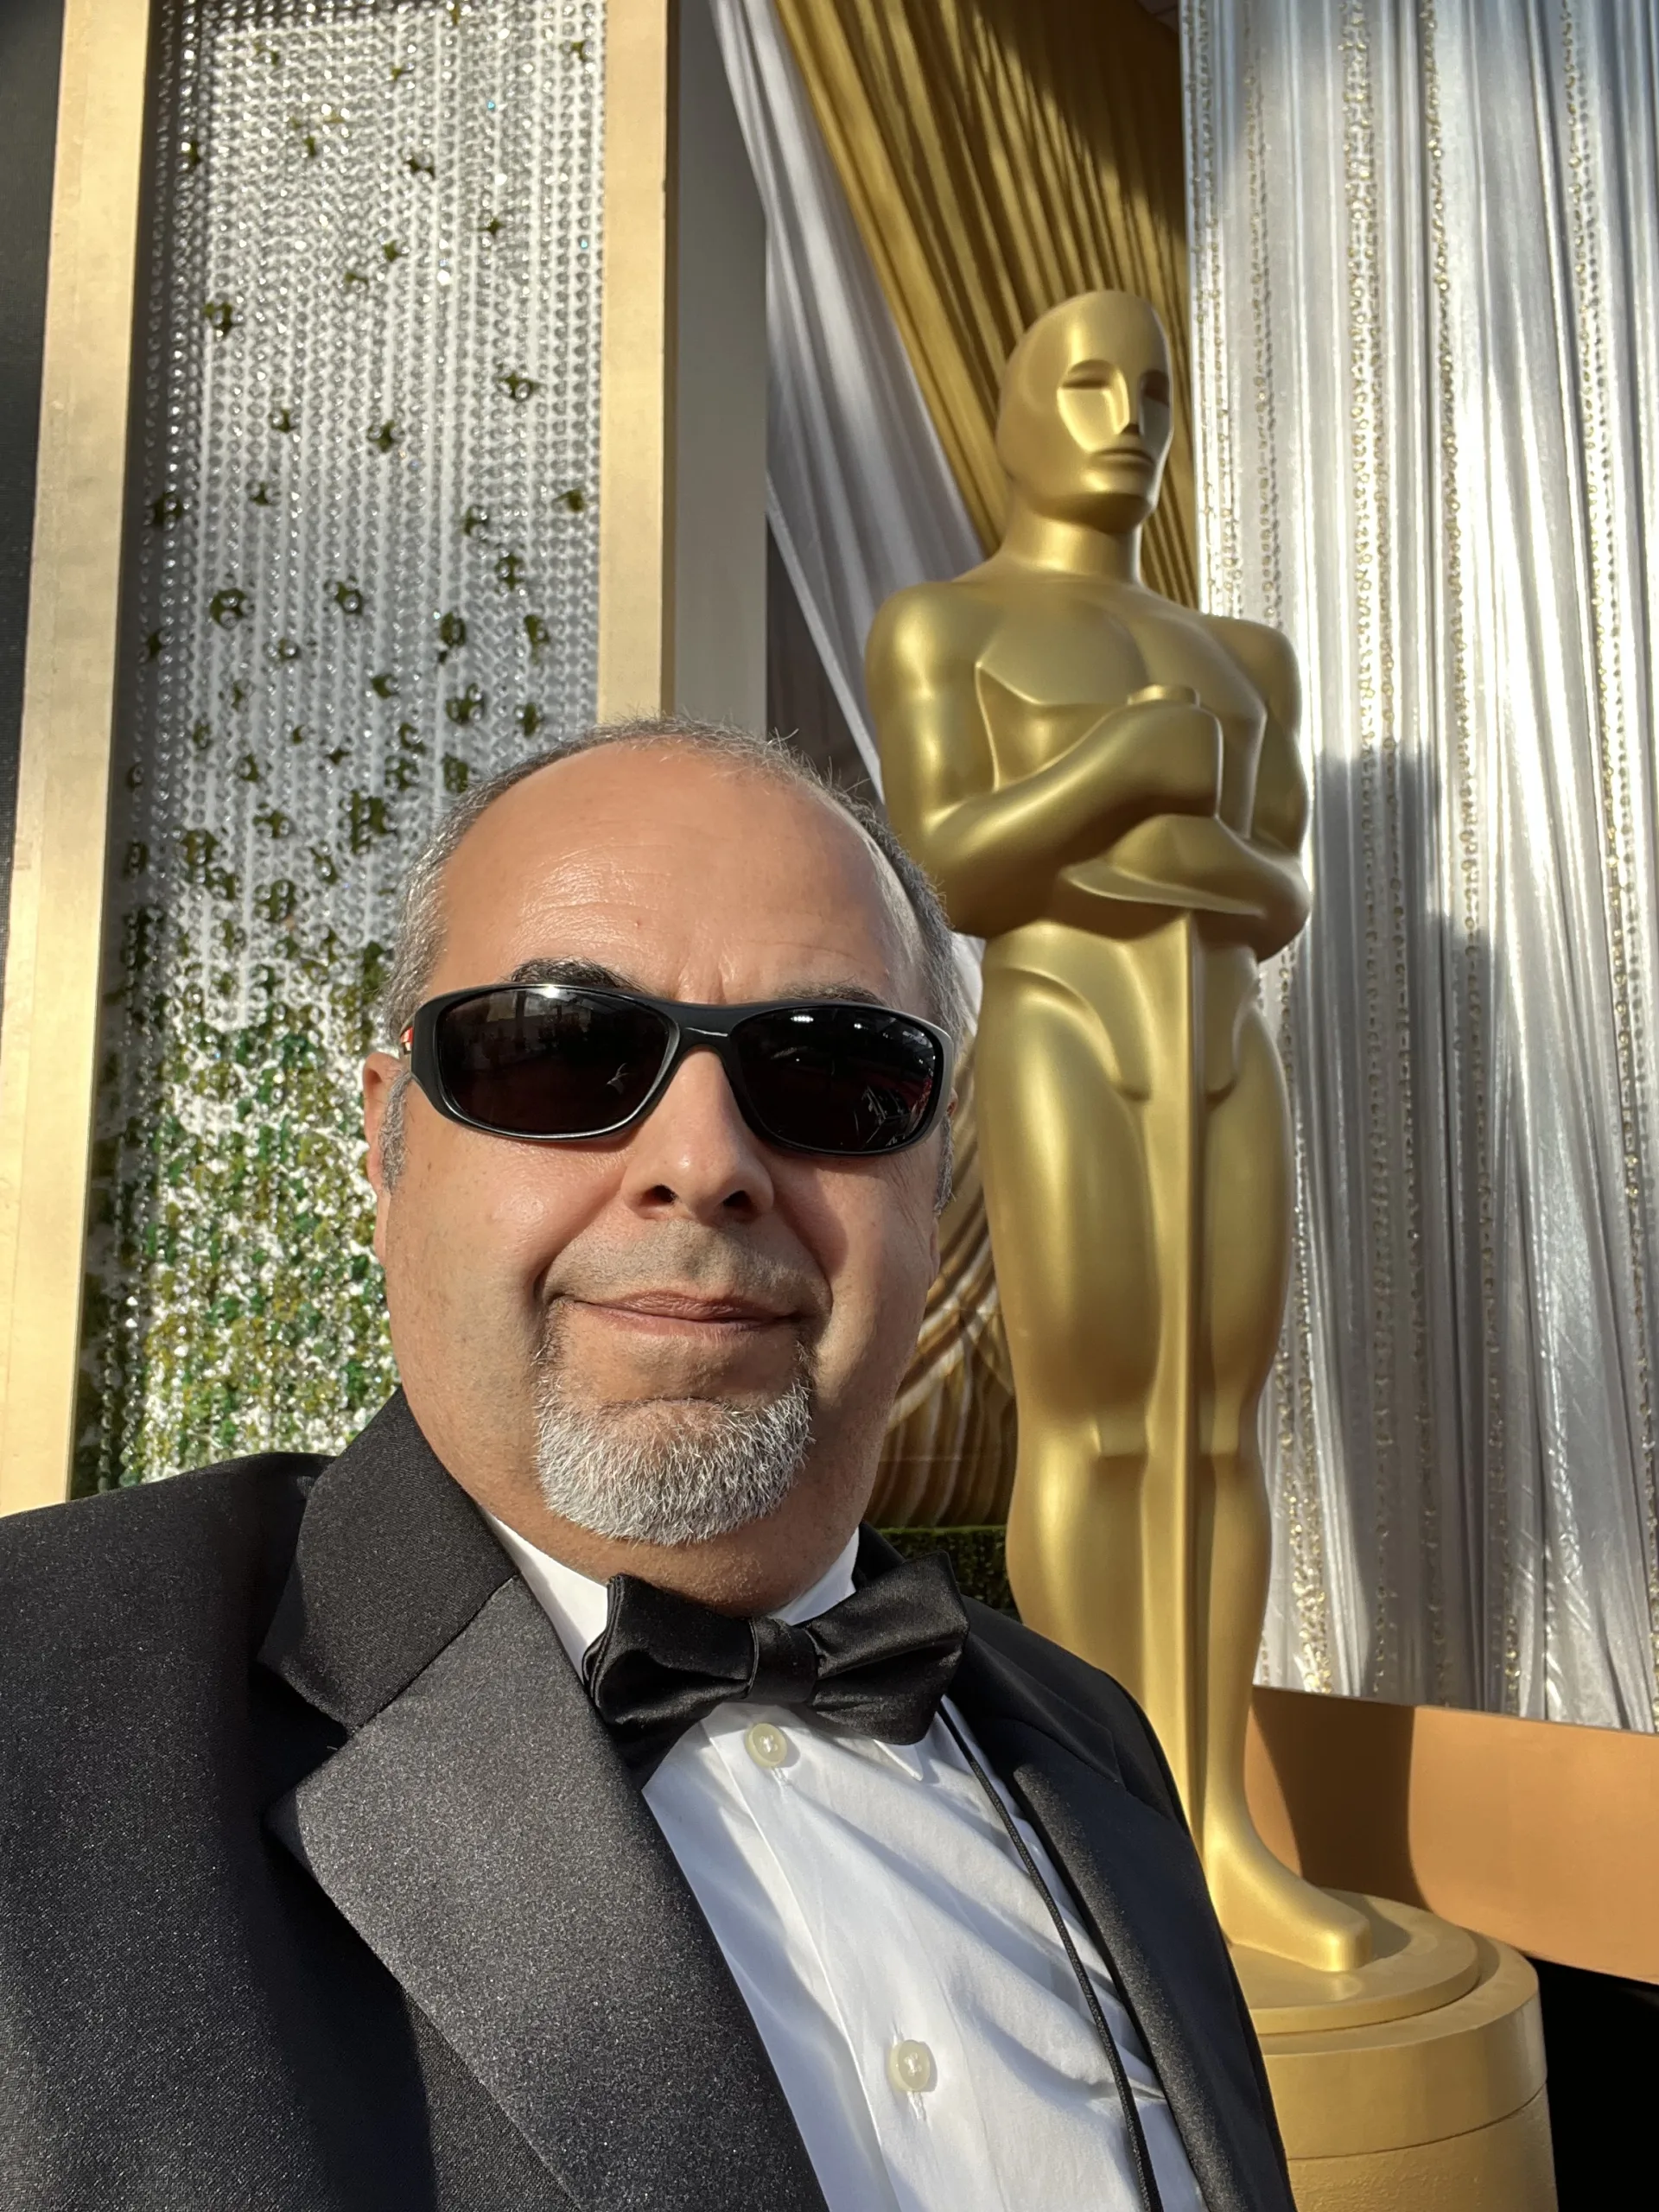 A man wearing sunglasses and a tuxedo in front of an oscar statue.